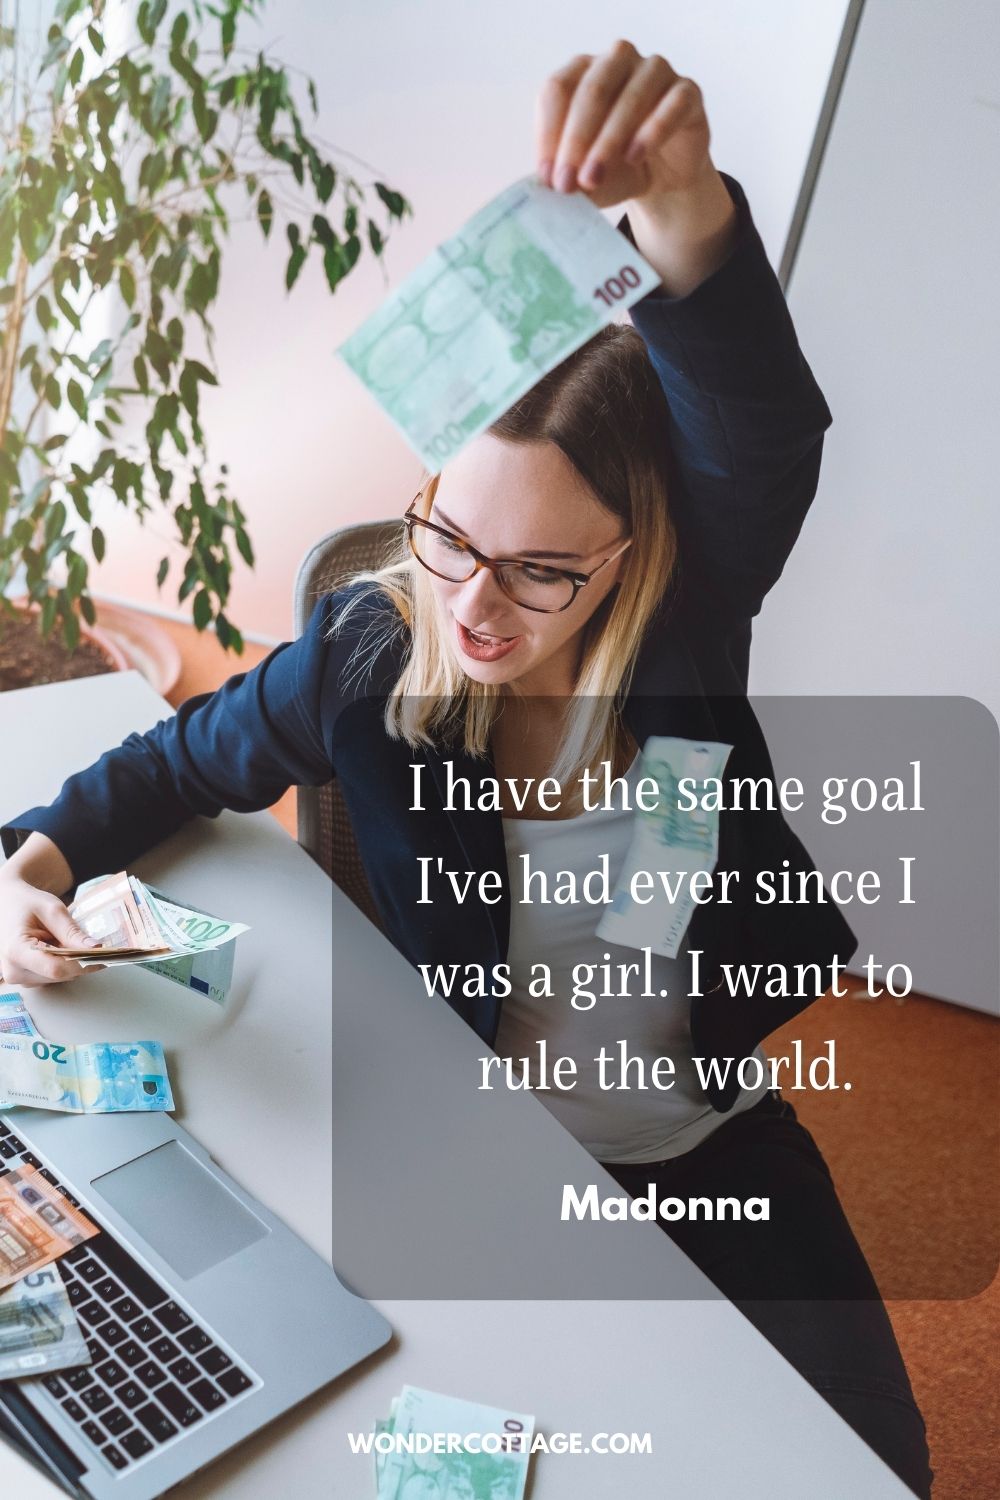 I have the same goal I've had ever since I was a girl. I want to rule the world." Madonna